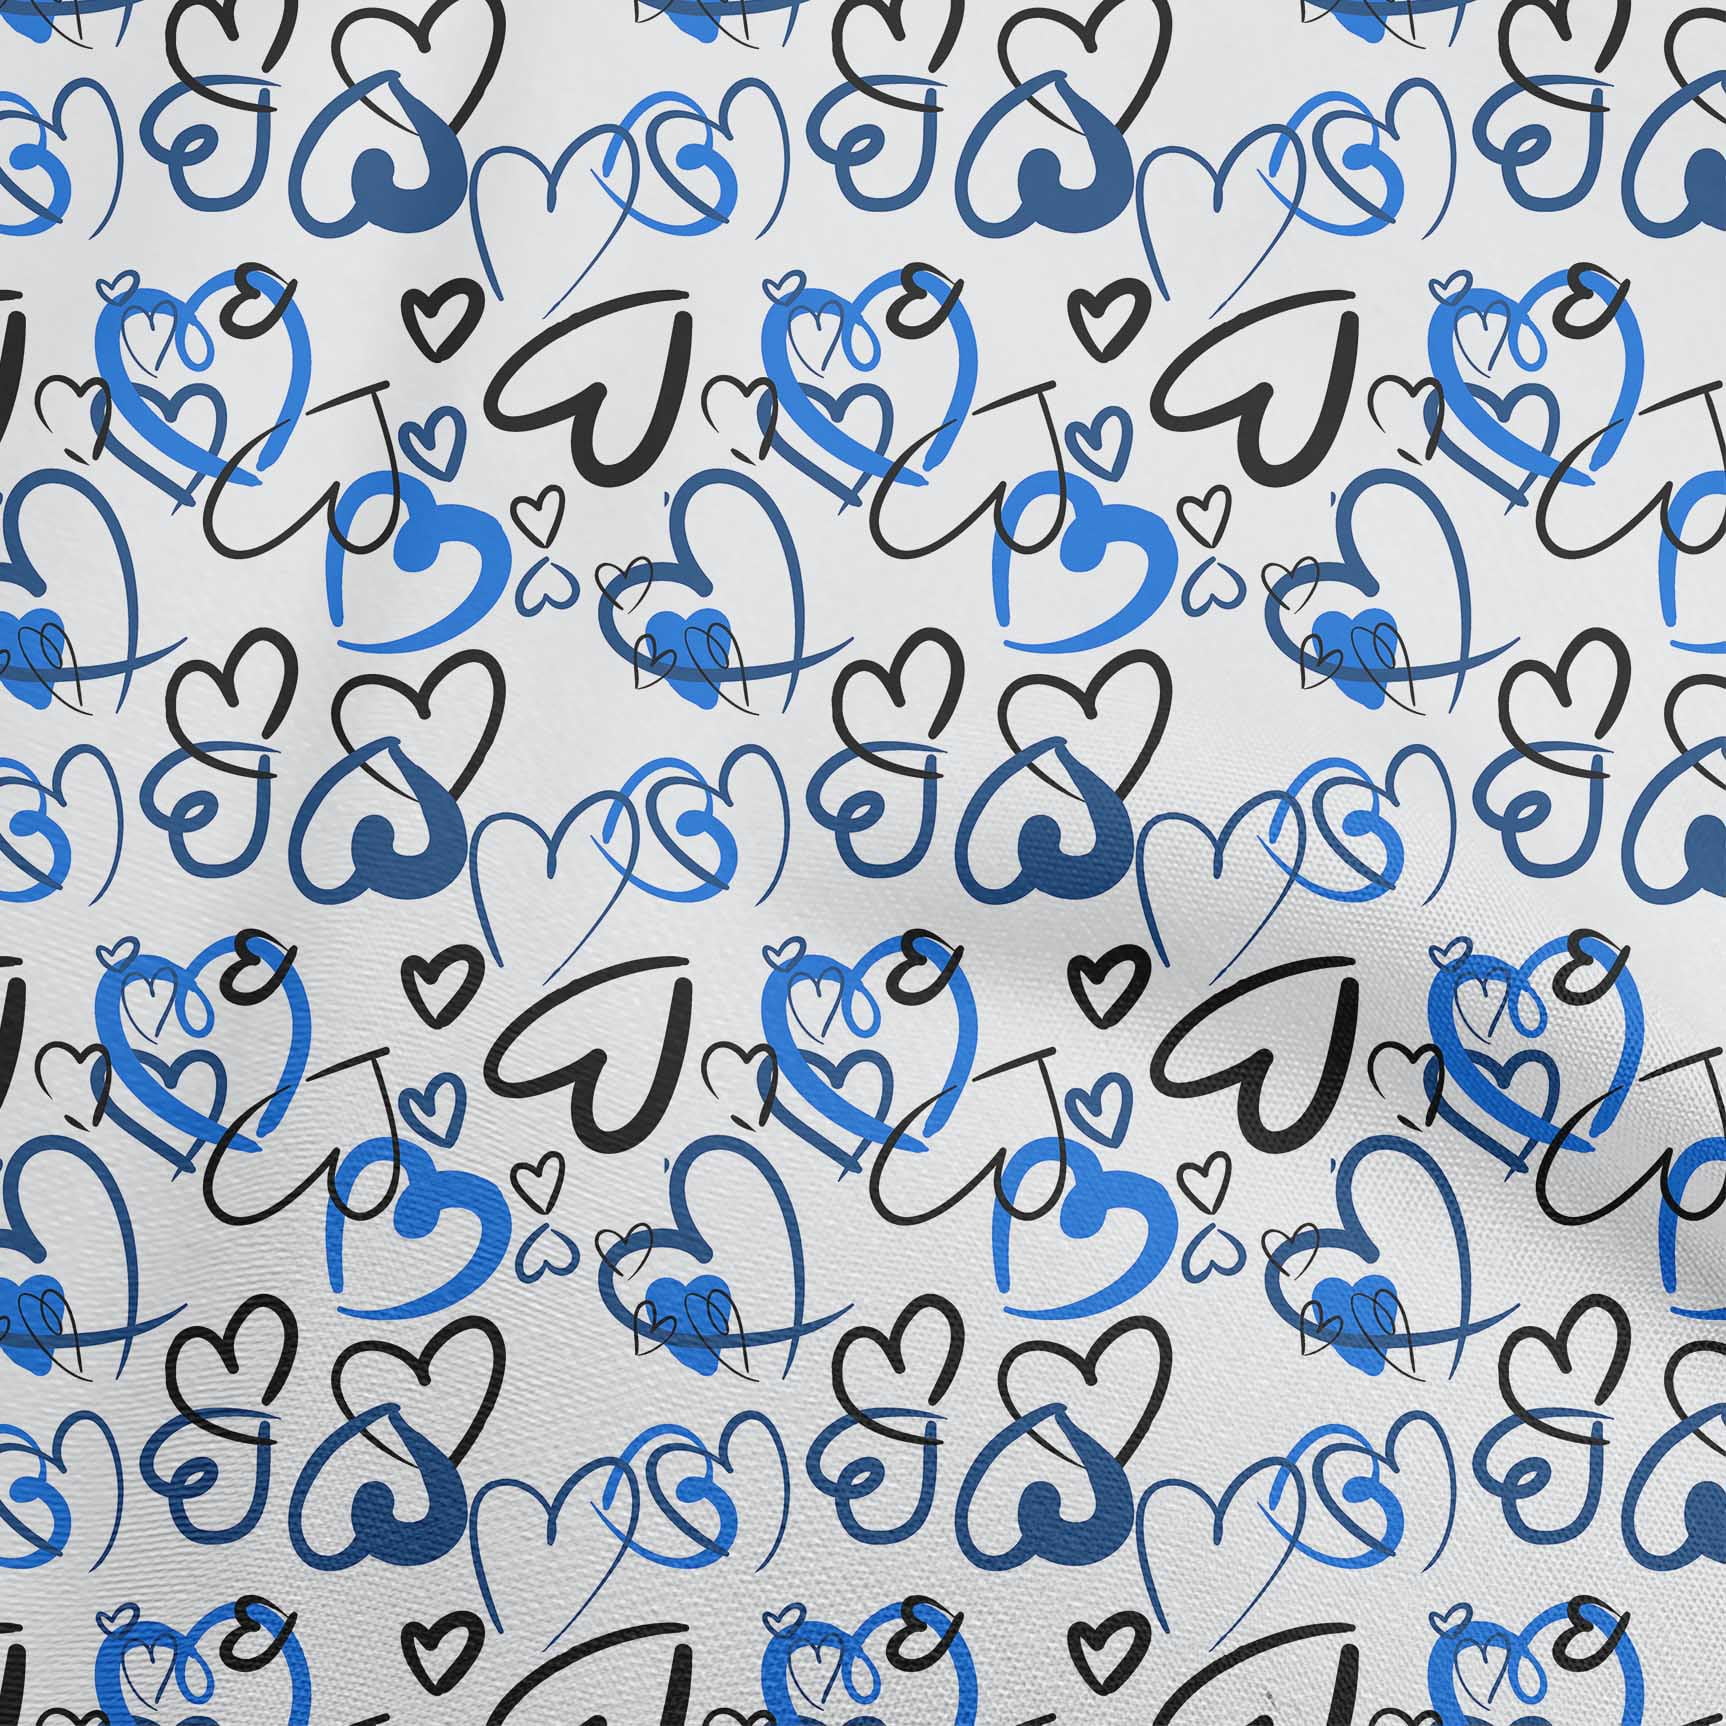 Love Mouse Cat Printed Fabric,100% CottonPolyester Cotton Fabric,DIY Quilt Fabric,Valentines Day Fabric By 12 Yard